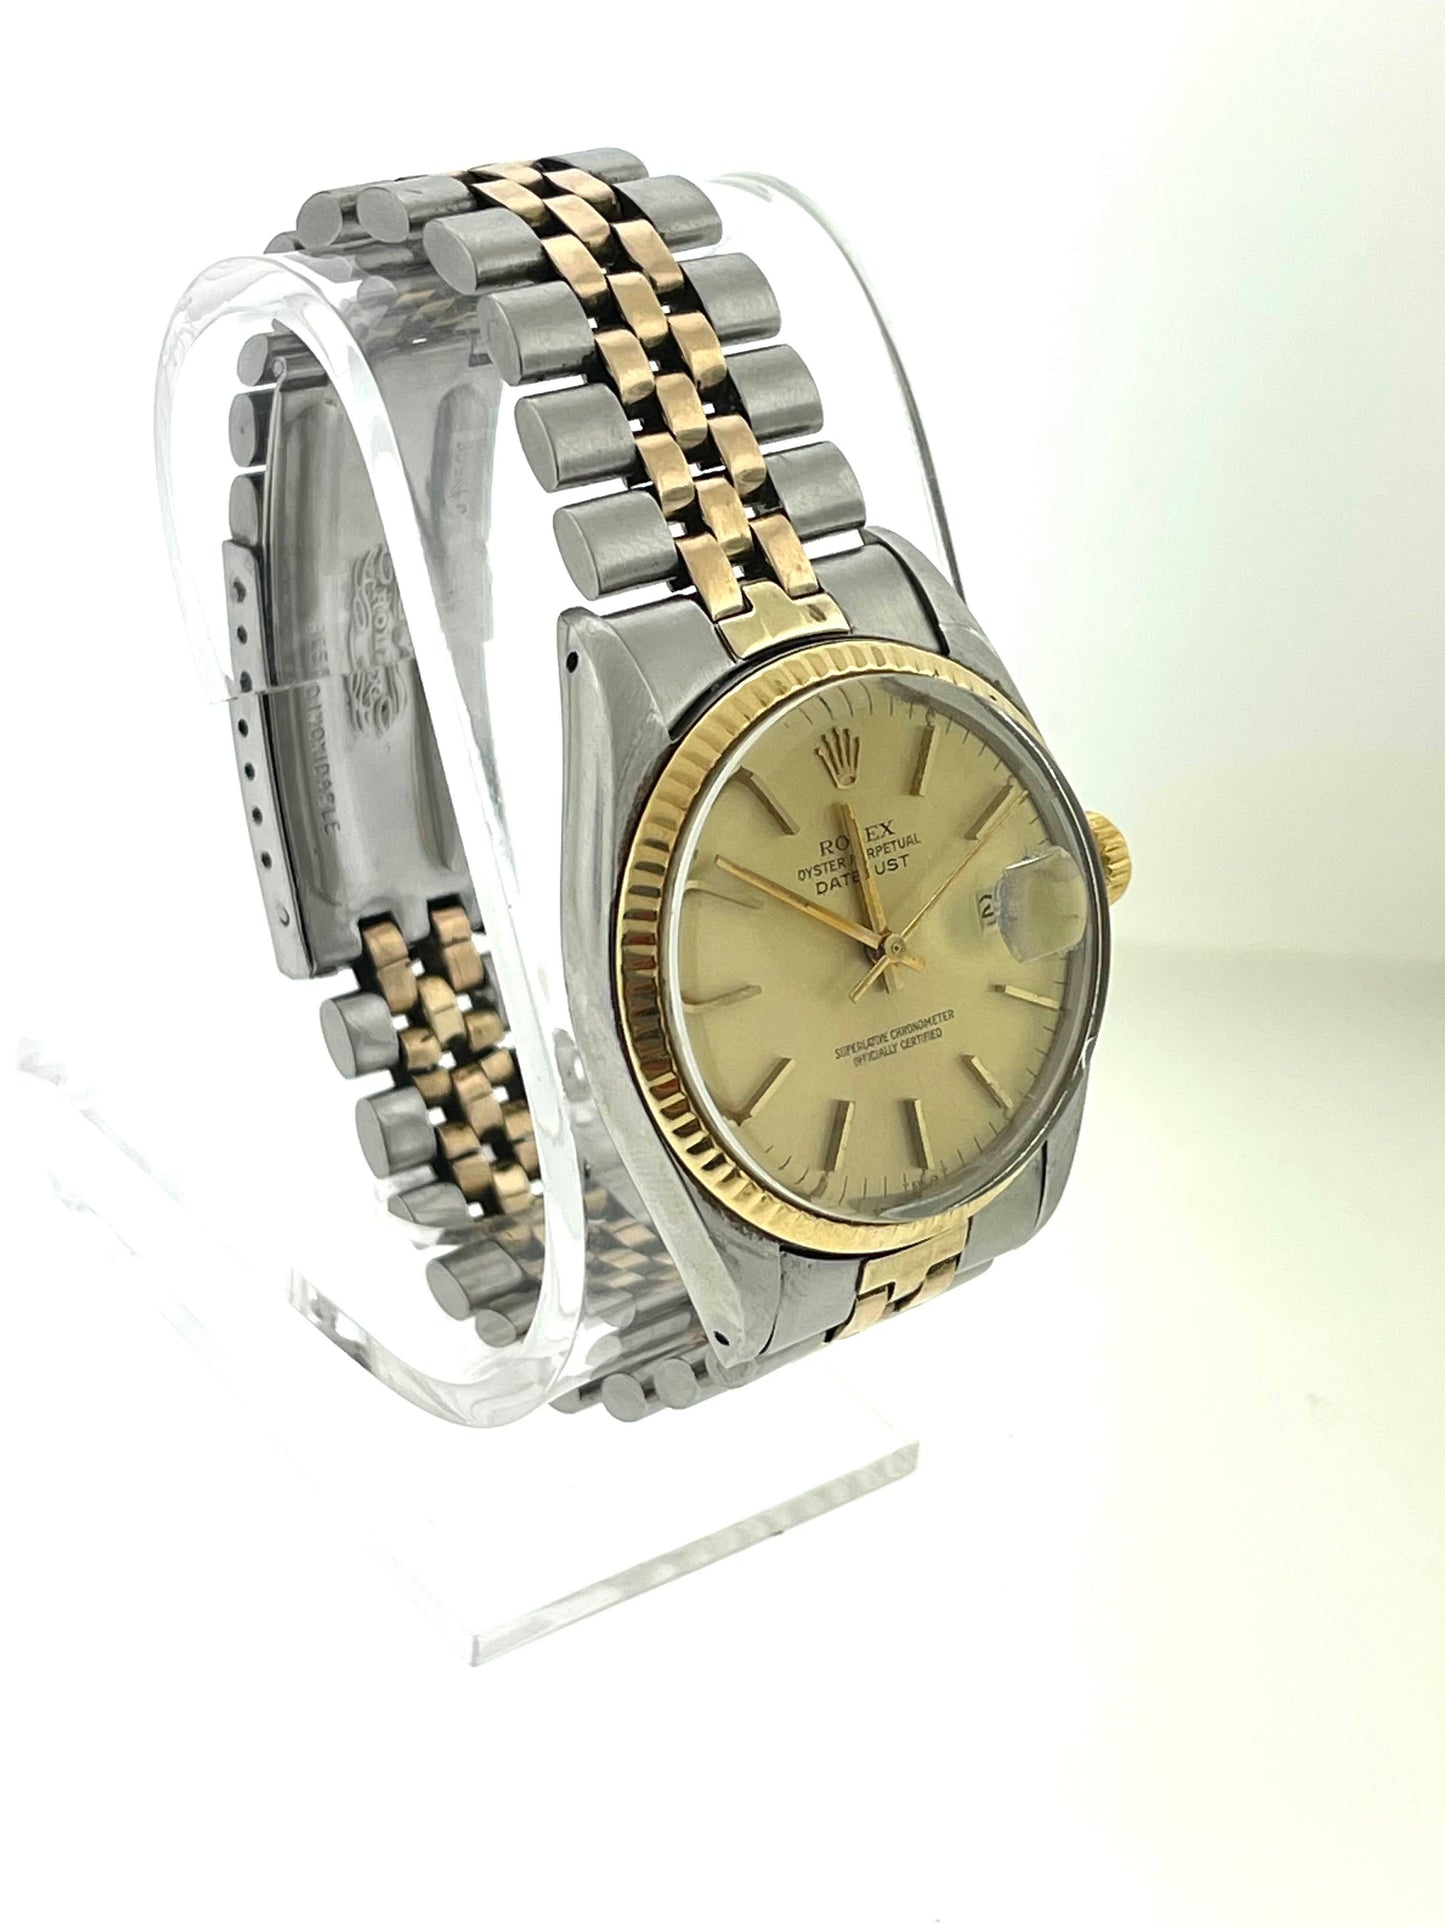 1978 Rolex Datejust 16013 Champagne Dial No Papers 36mm